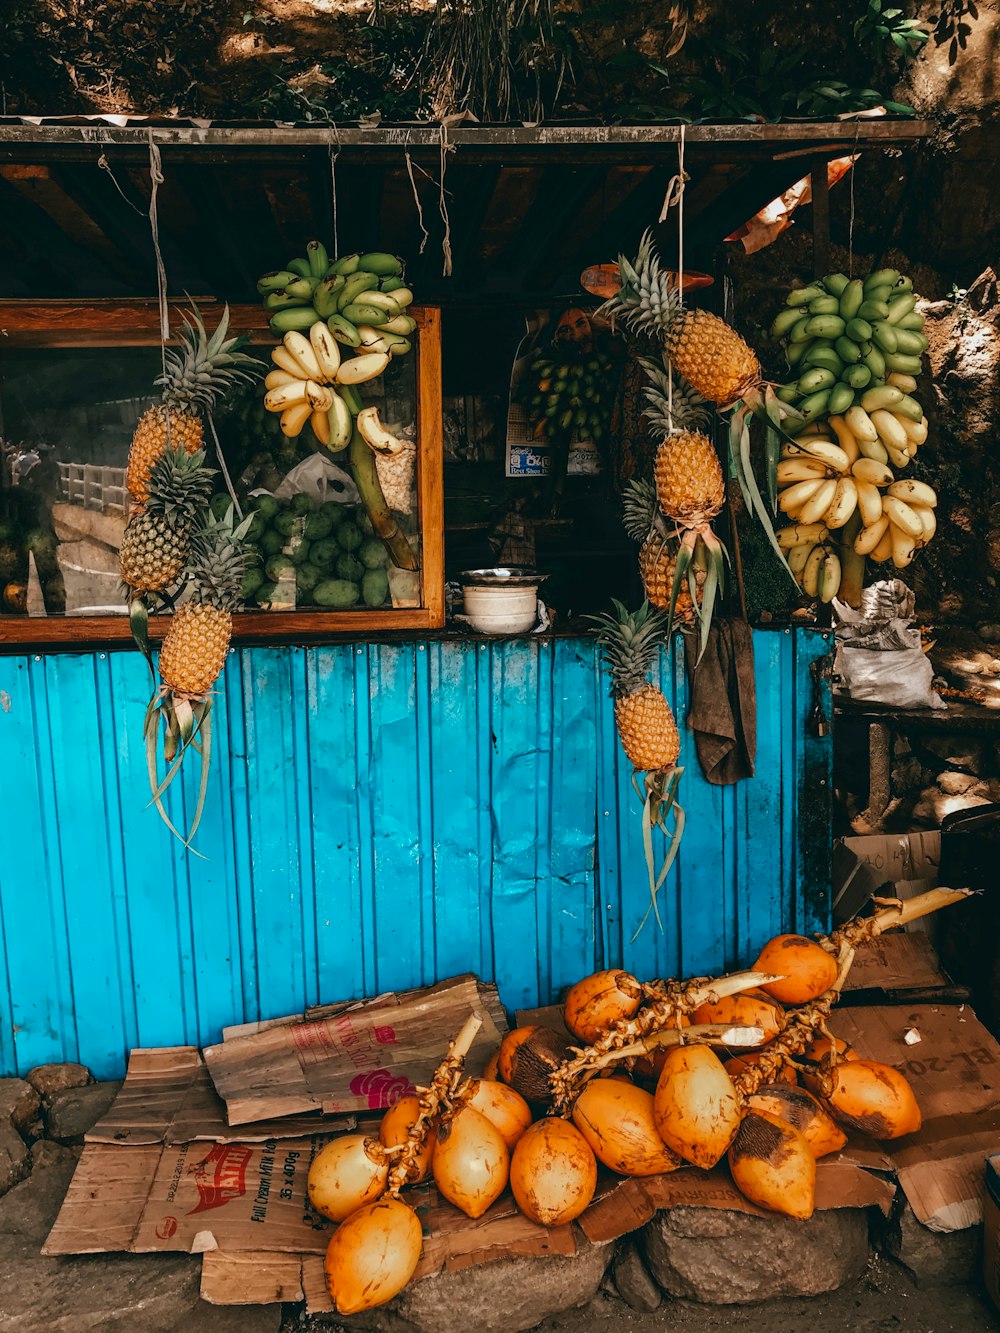 fruits hanged on string at stall during daytime